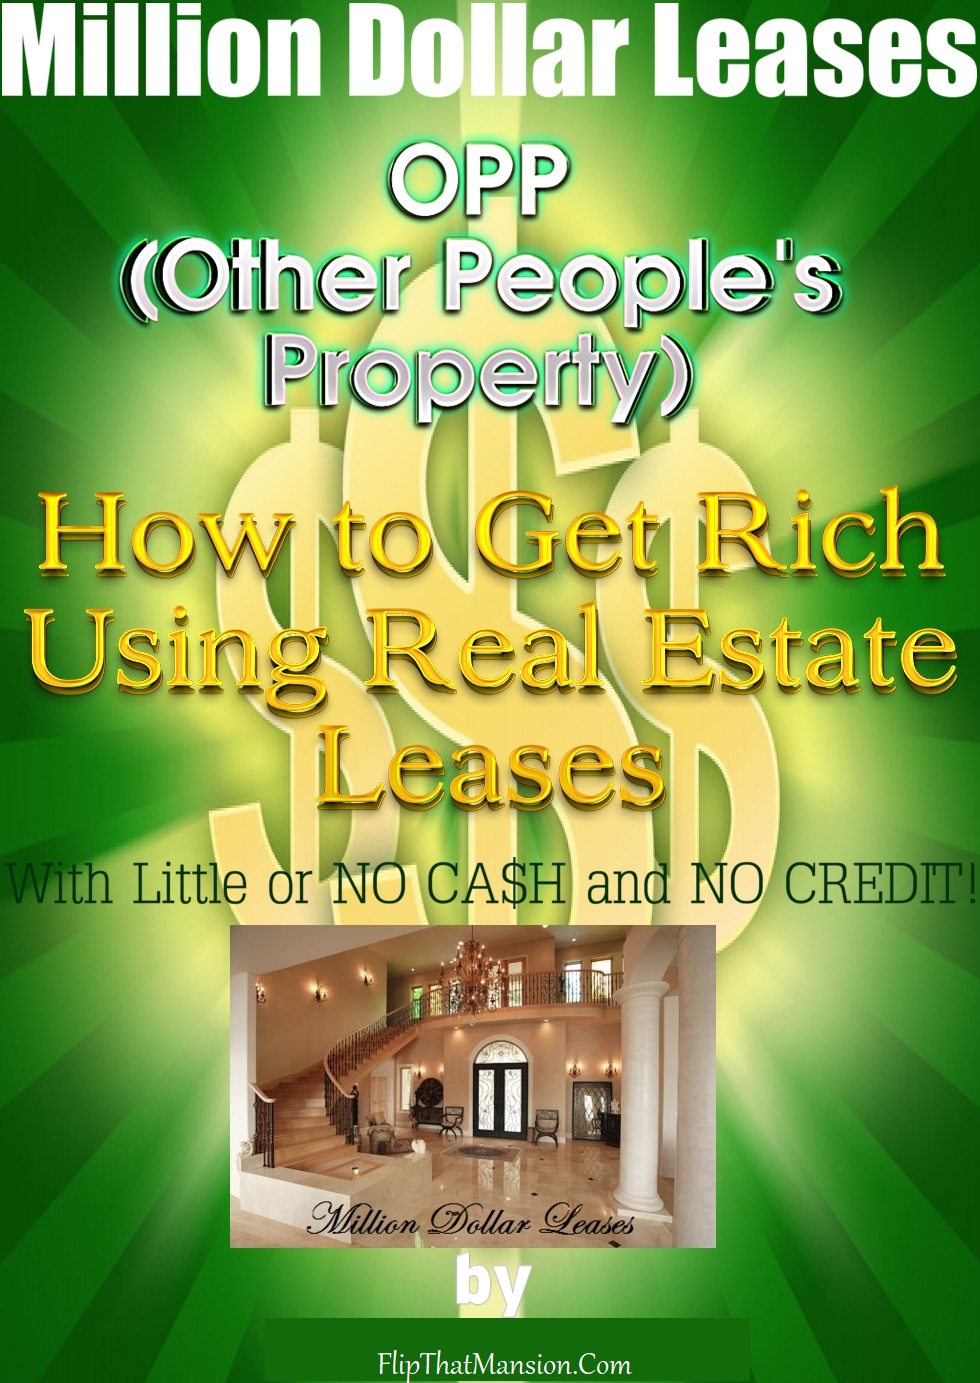 How To Get Rich In Real Estate!